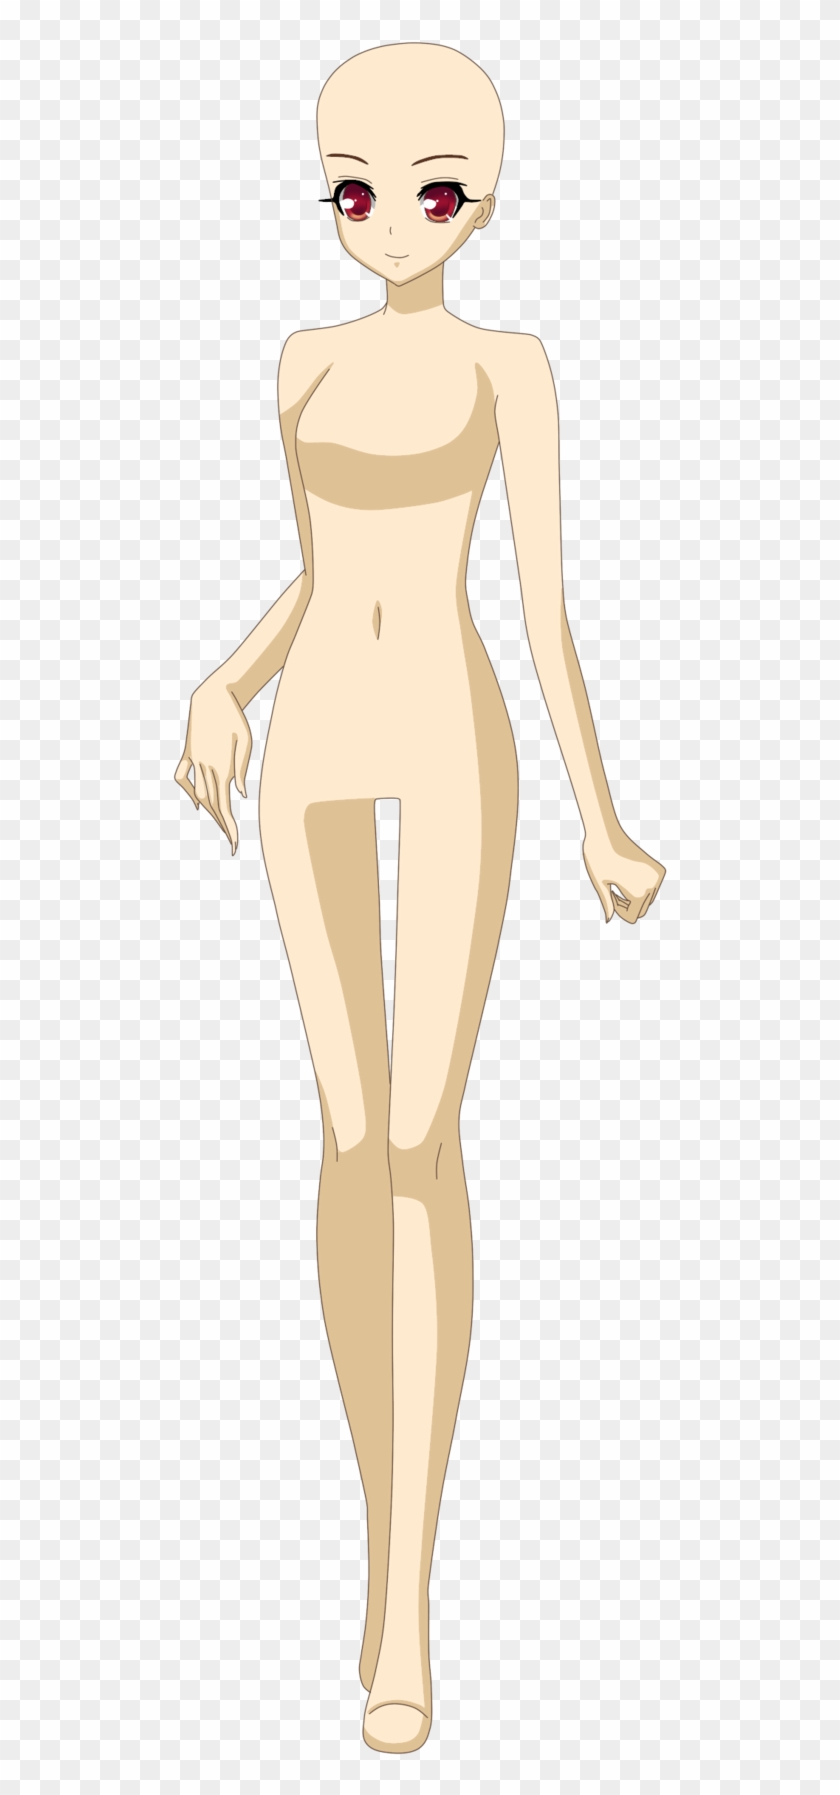 Cute Anime Girl Base By Kara Uchiha Anime Base Female Cute Free Transparent Png Clipart Images Download Welcome to anime characters database. cute anime girl base by kara uchiha